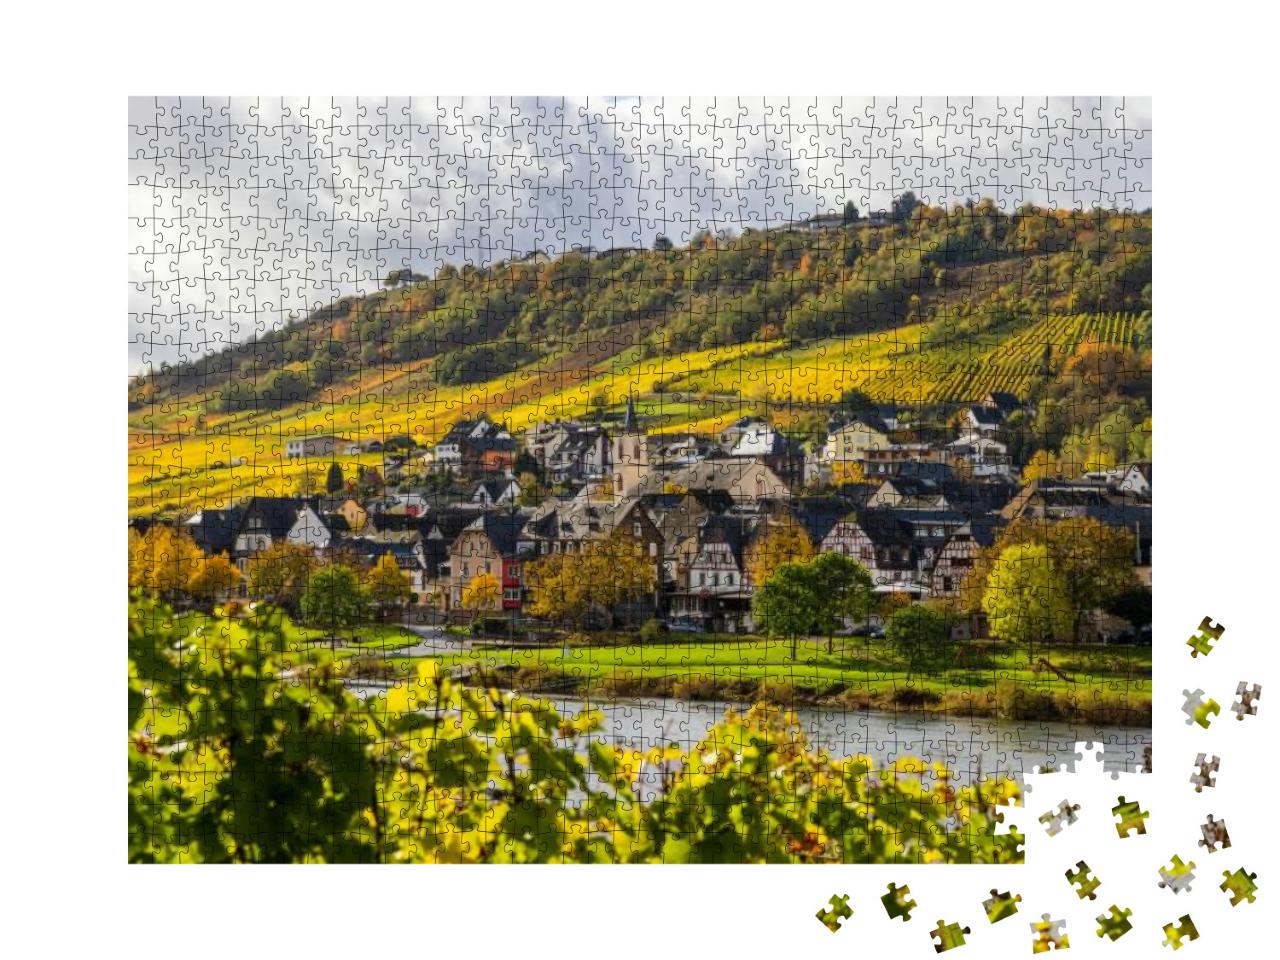 Moselle Landscape & Vineyards in Golden Autumn Colors, Tr... Jigsaw Puzzle with 1000 pieces